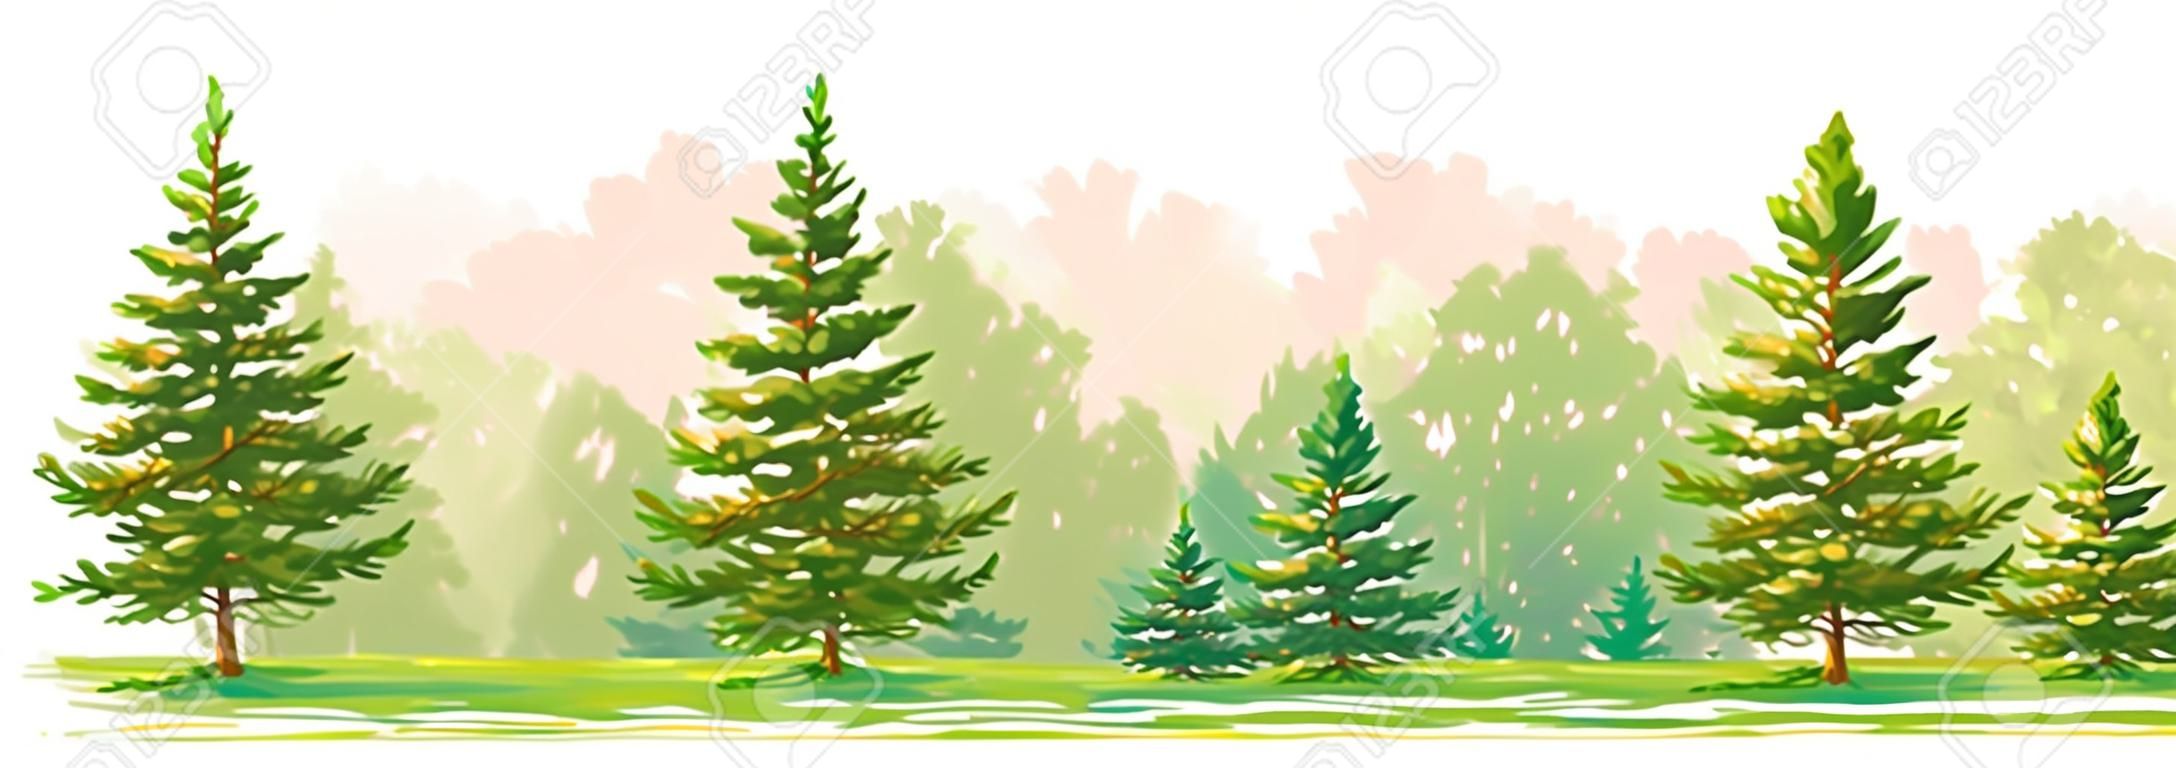 Border of a forest with young fir and pine trees. Vector graphic. EPS8